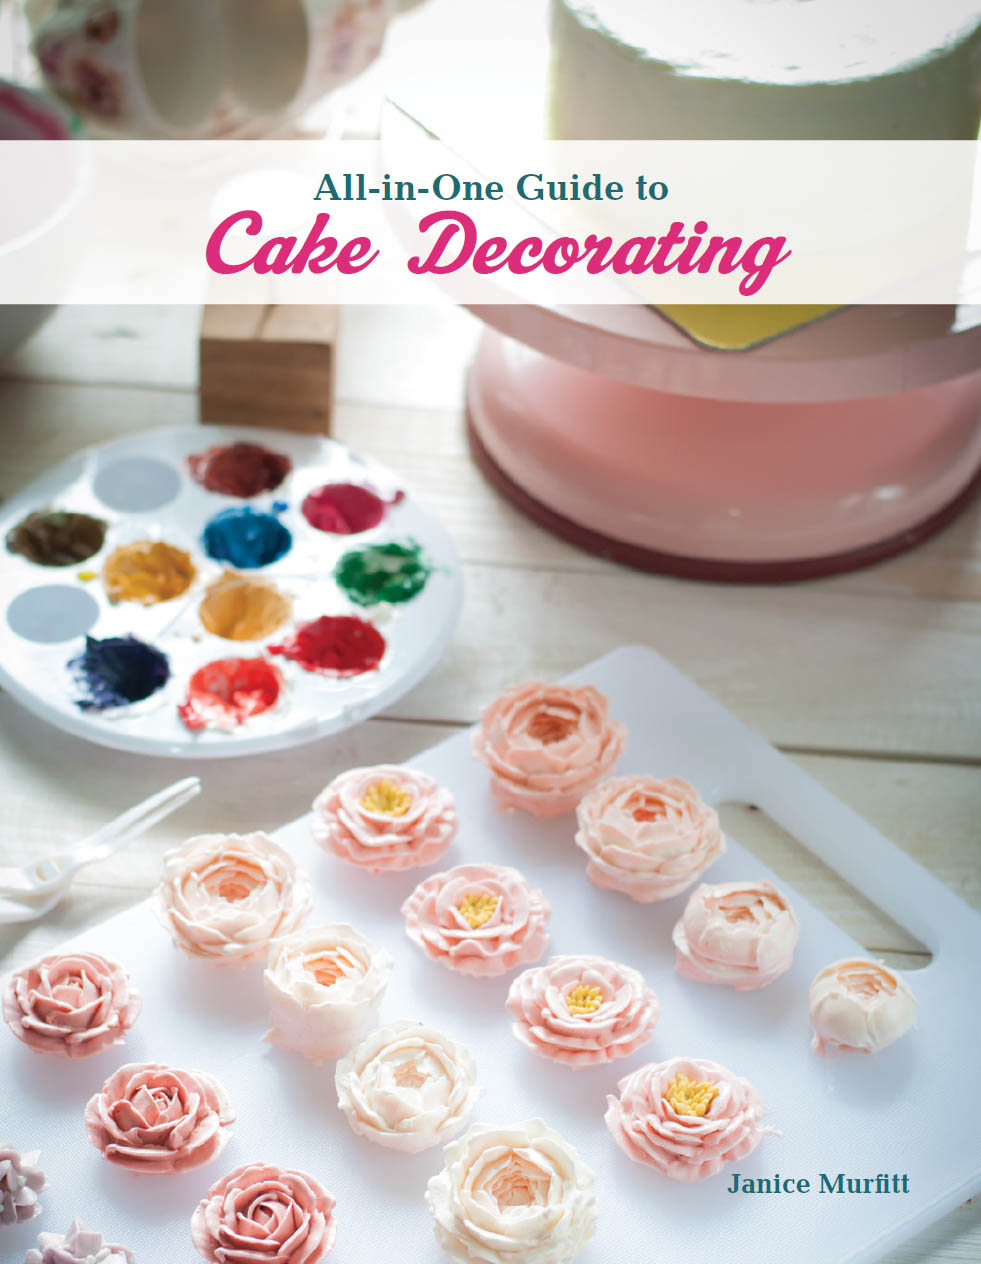 All-in-One Guide to Cake Decorating CompanionHouse Books is an imprint of Fox - photo 1